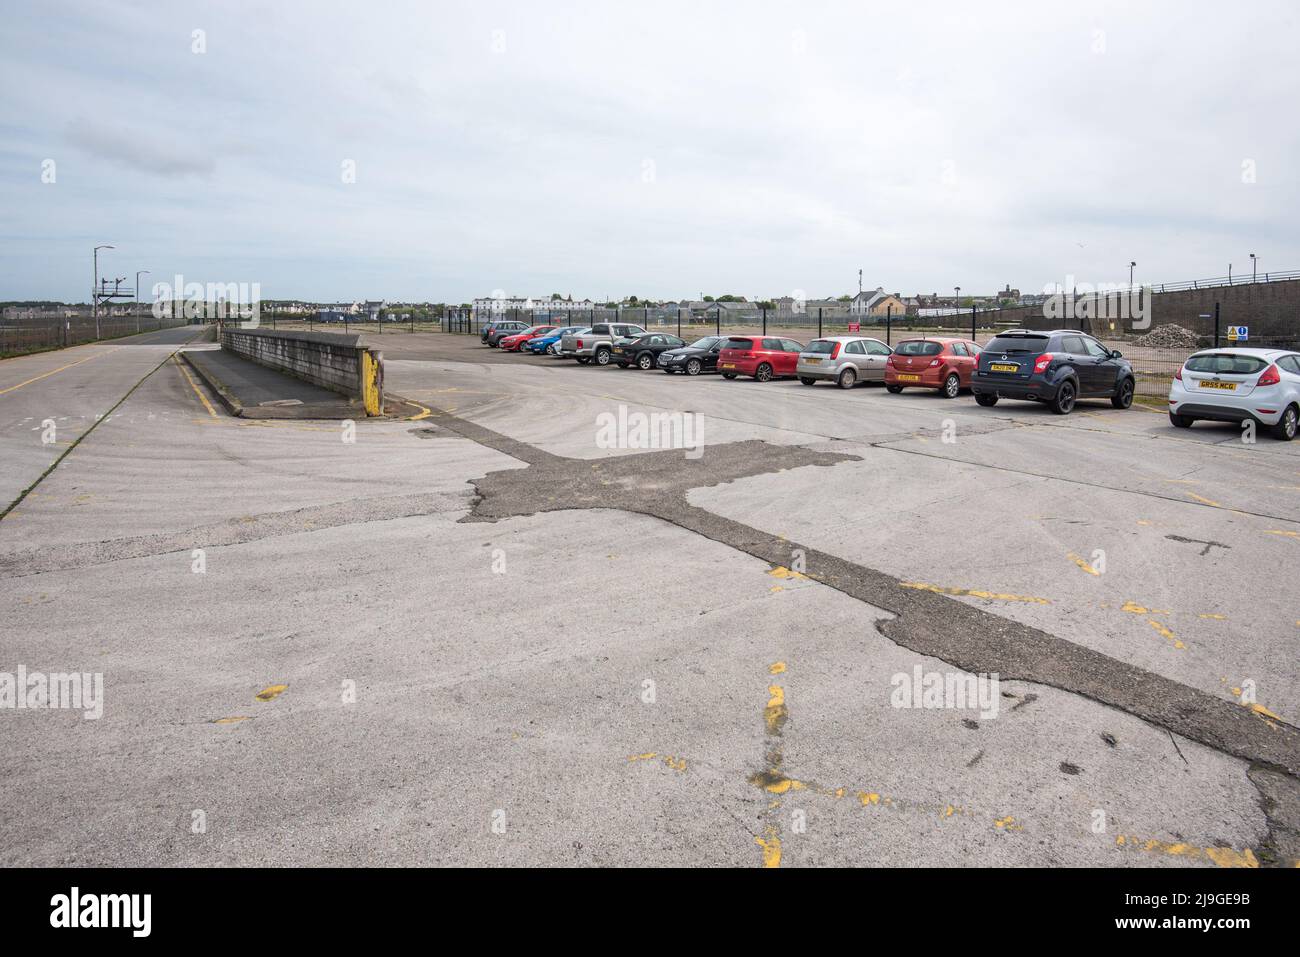 Cars (presumably rail travellers) parked close to Stranraer Harbour Railway Station & adjacent to disused lorry parking and former ferry port facility. Stock Photo